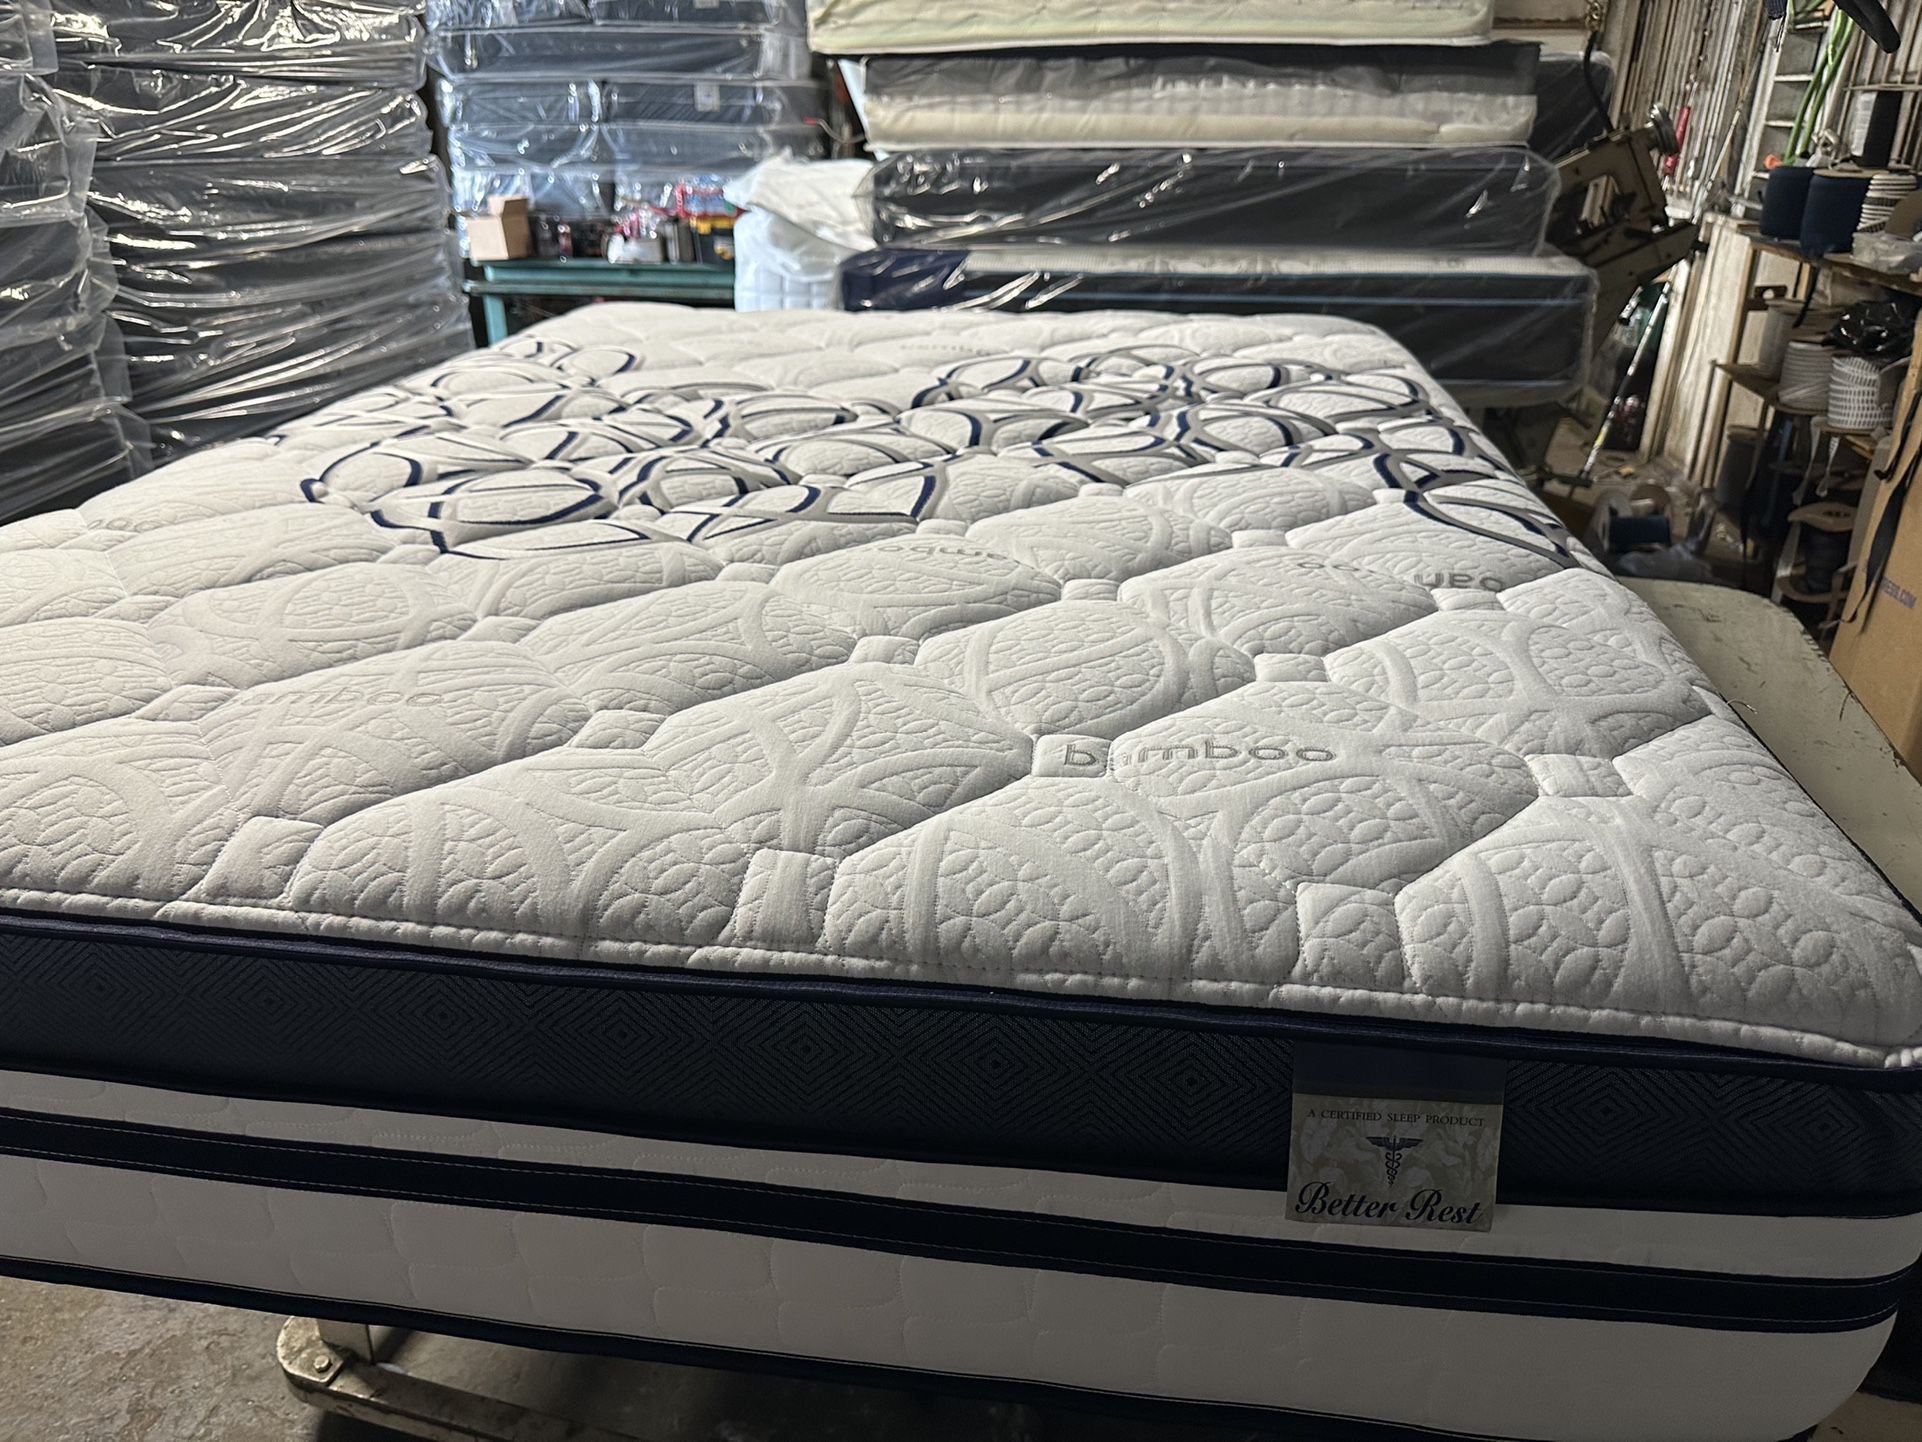 BRAND NEW “LUXURY EURO PILLOW TOP HYBRID BAMBOO” MATTRESSES  COLCHONES NUEVOS PILLOW TOP 💯  💥12 inches thick 💥  Queen $240 ❌ $300 With Box Spring 